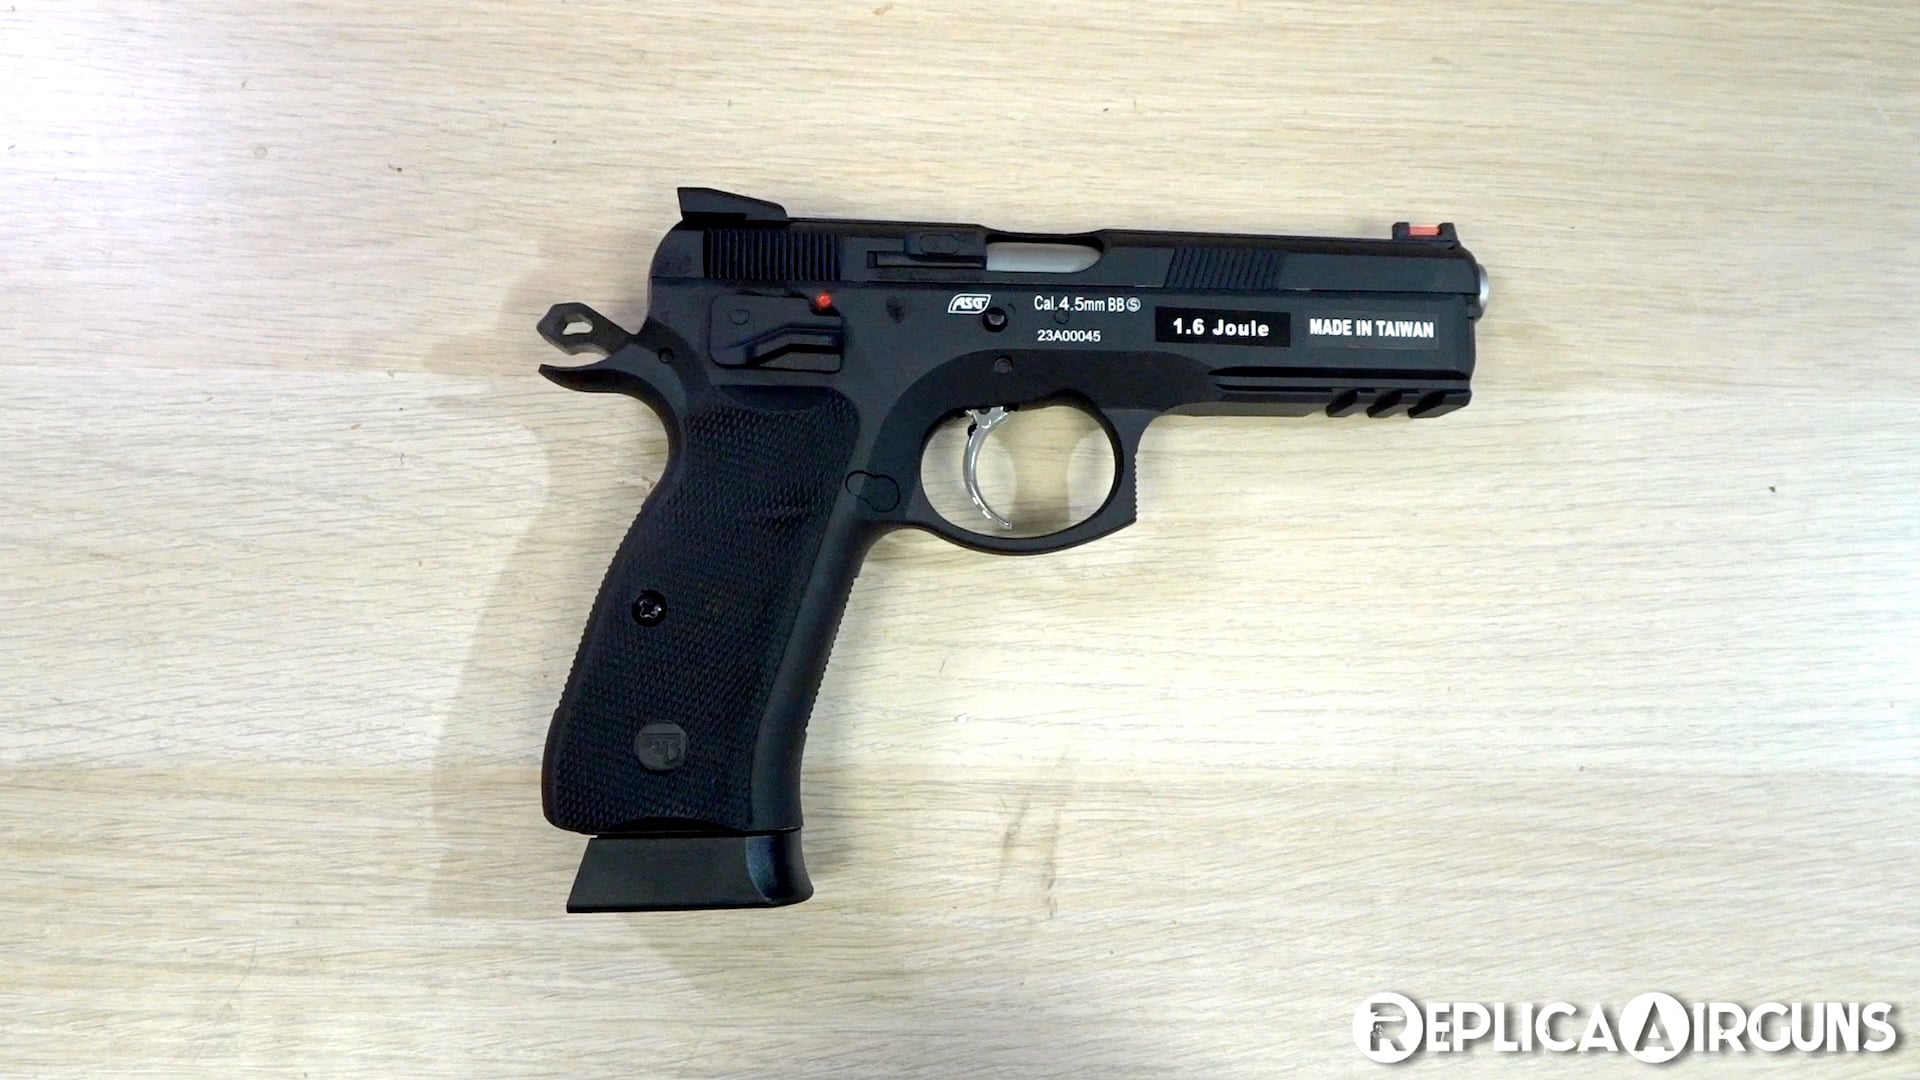 ASG CZ 75 SP-01 Shadow Blowback CO2 BB Pistol Table Top Review